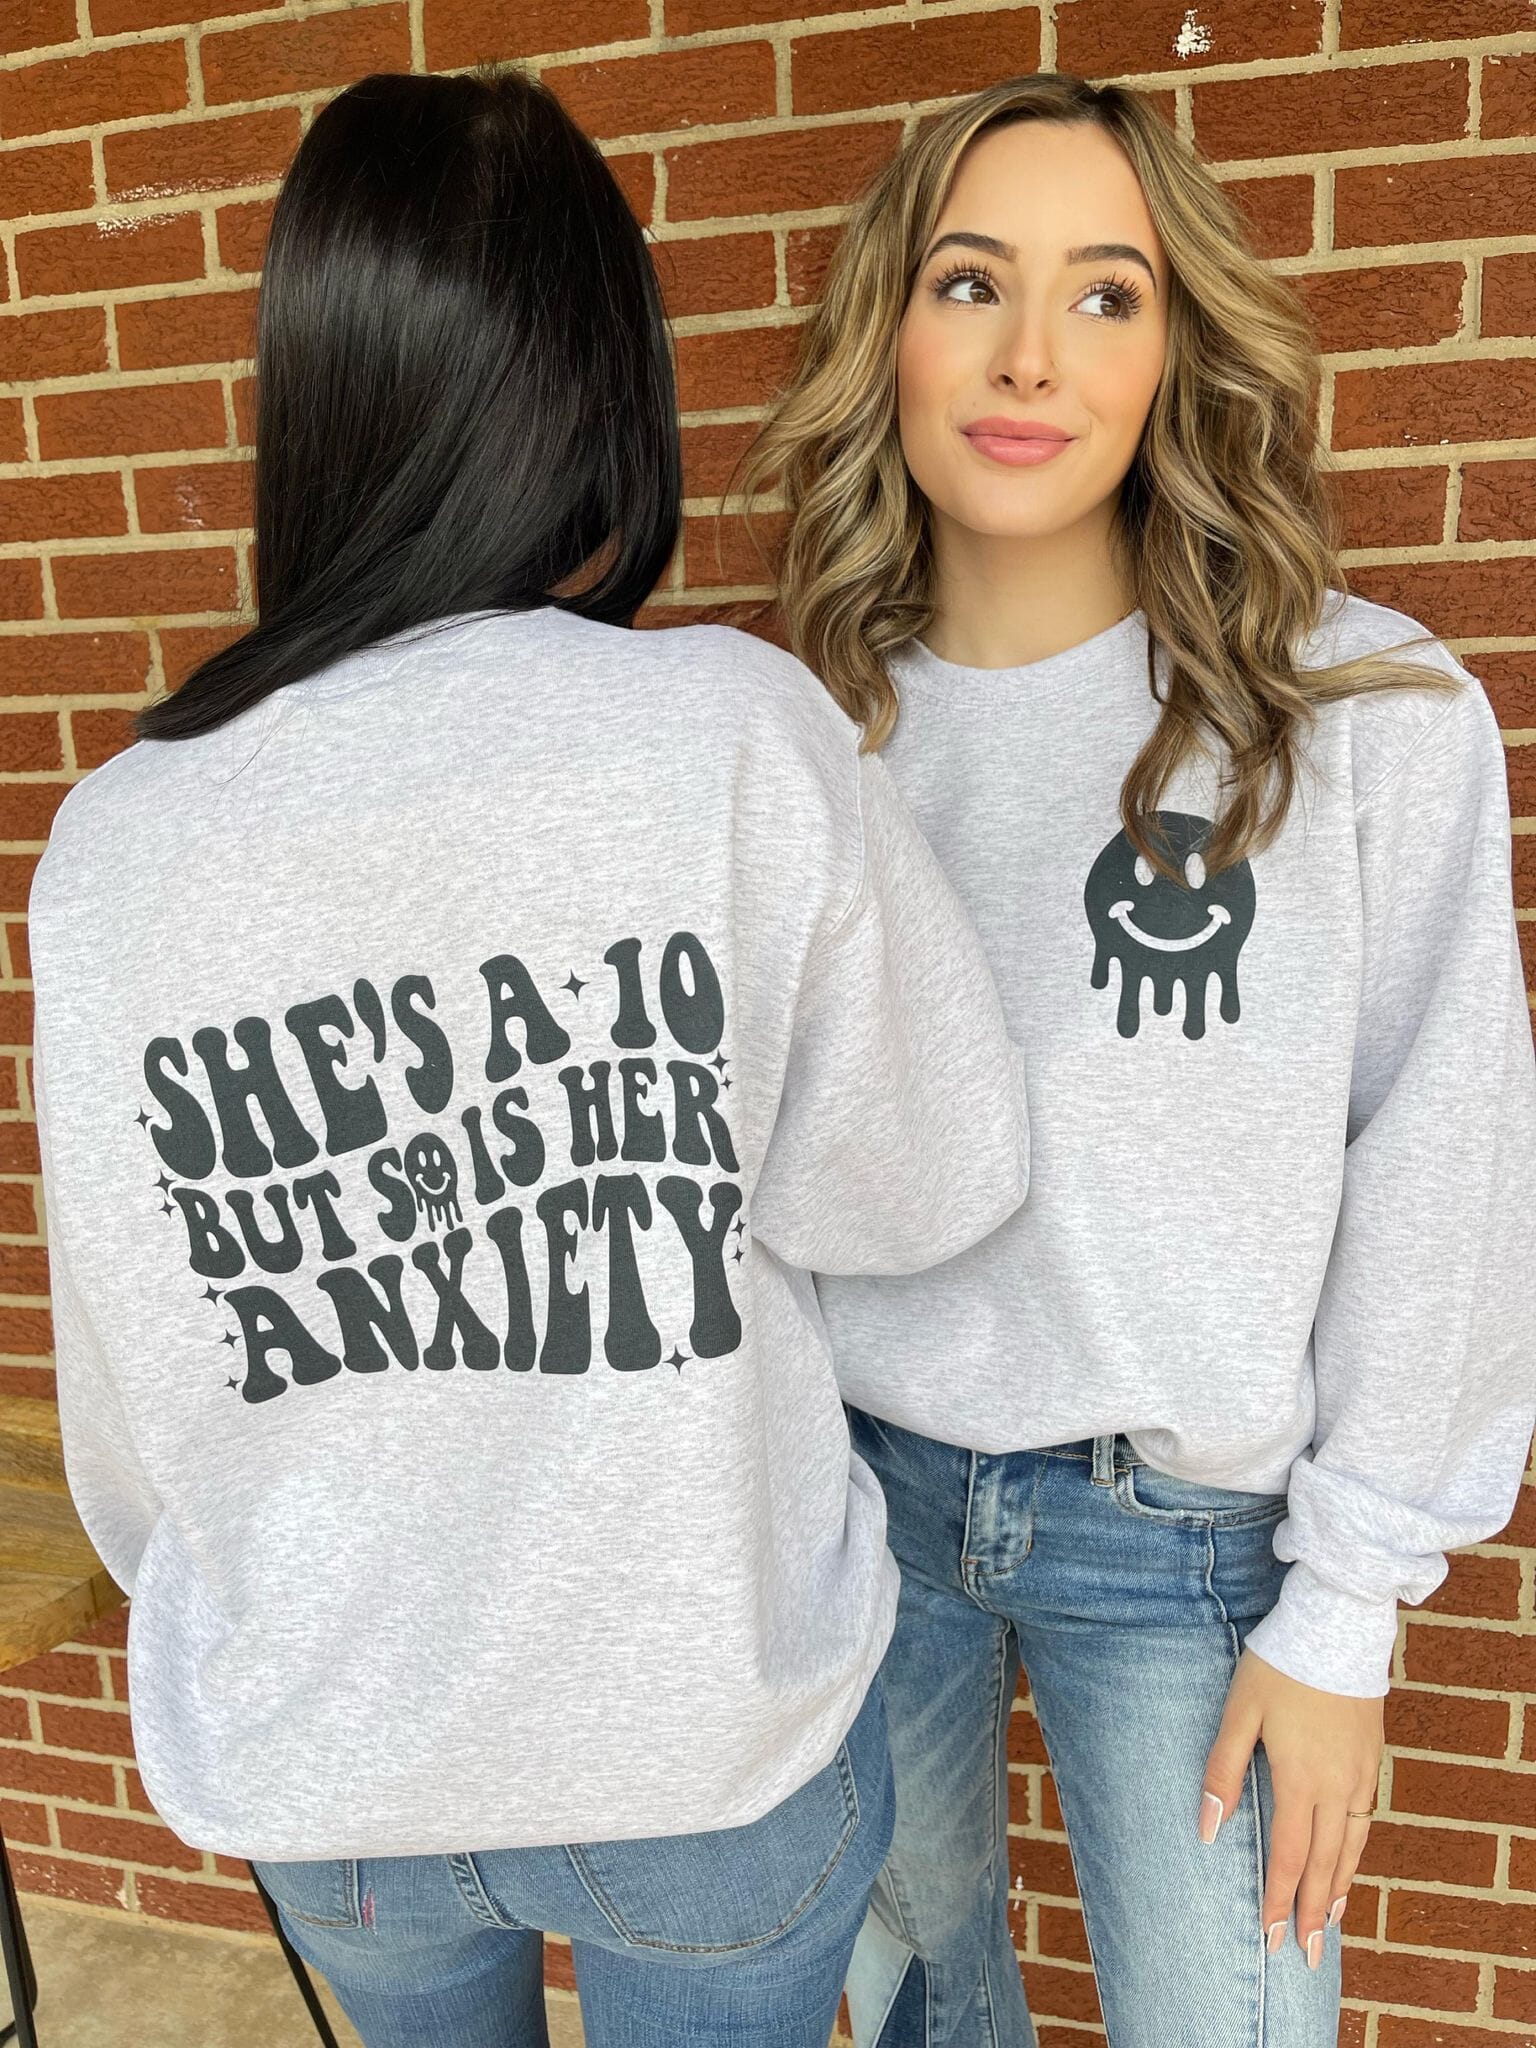 Her Anxiety Is A 10 Sweatshirt ask apparel wholesale 